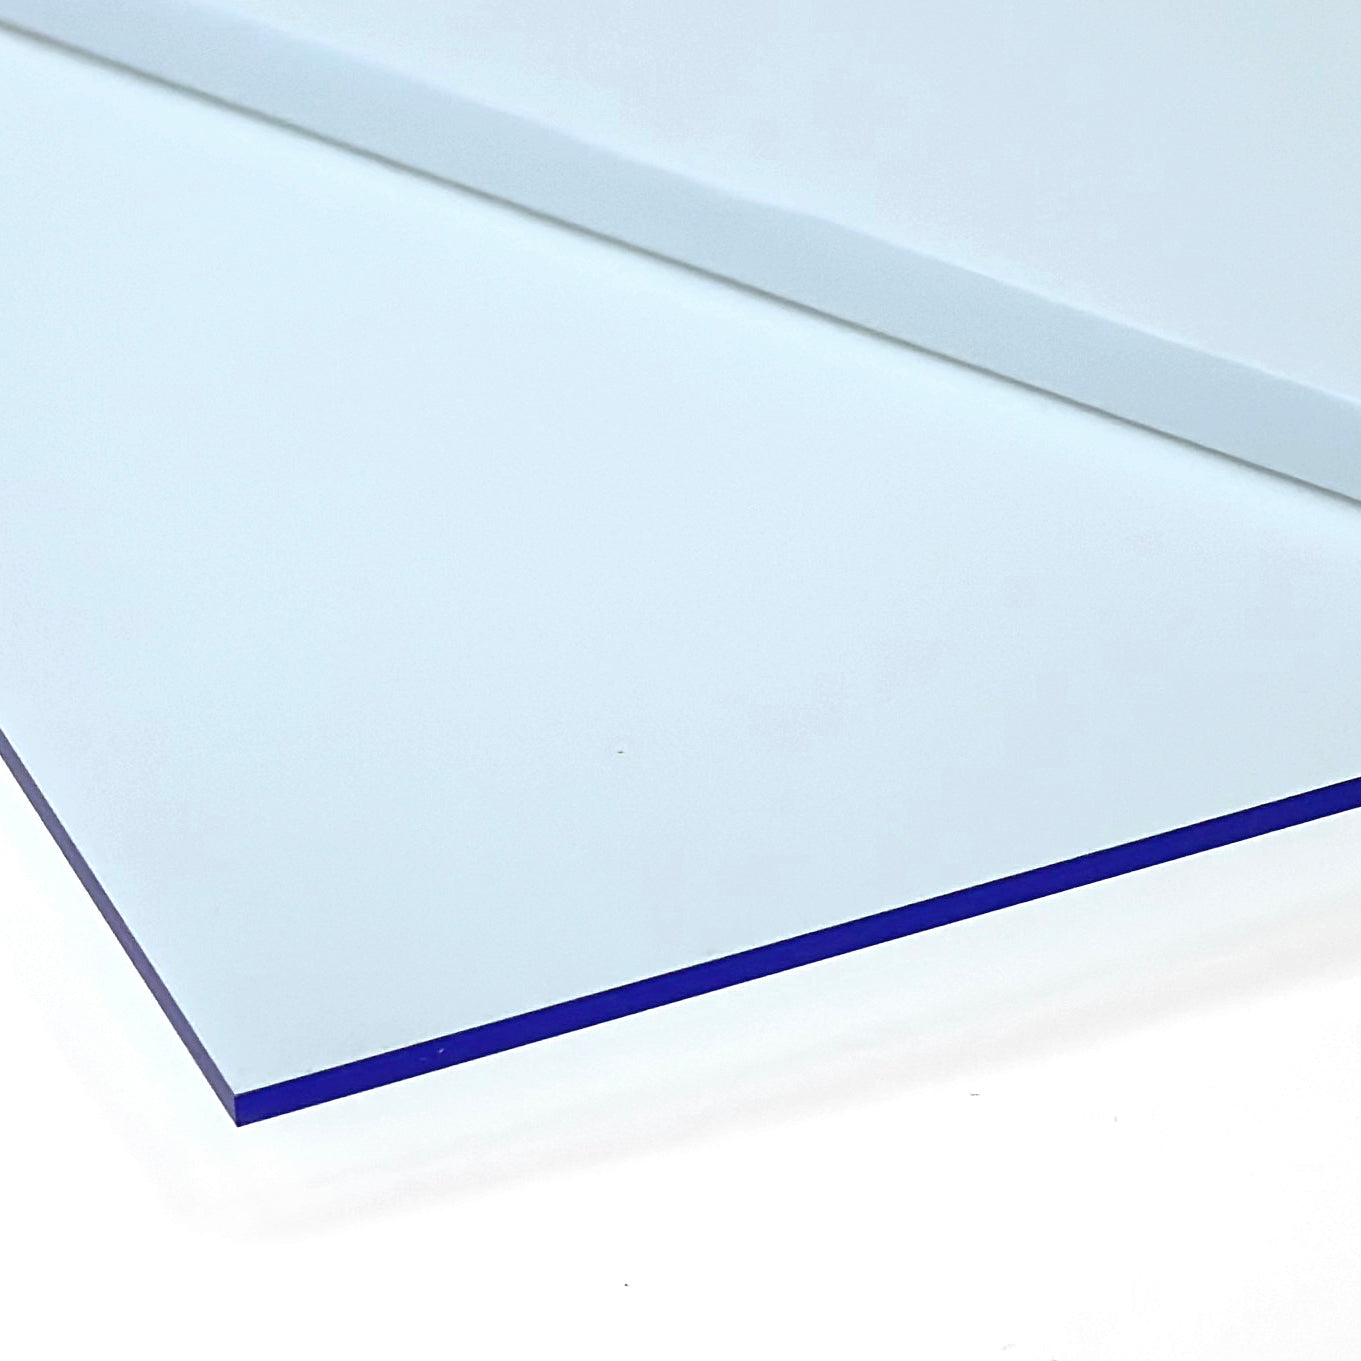 Transparent Blue Acrylic with laser cutting & printing - 300x200mm